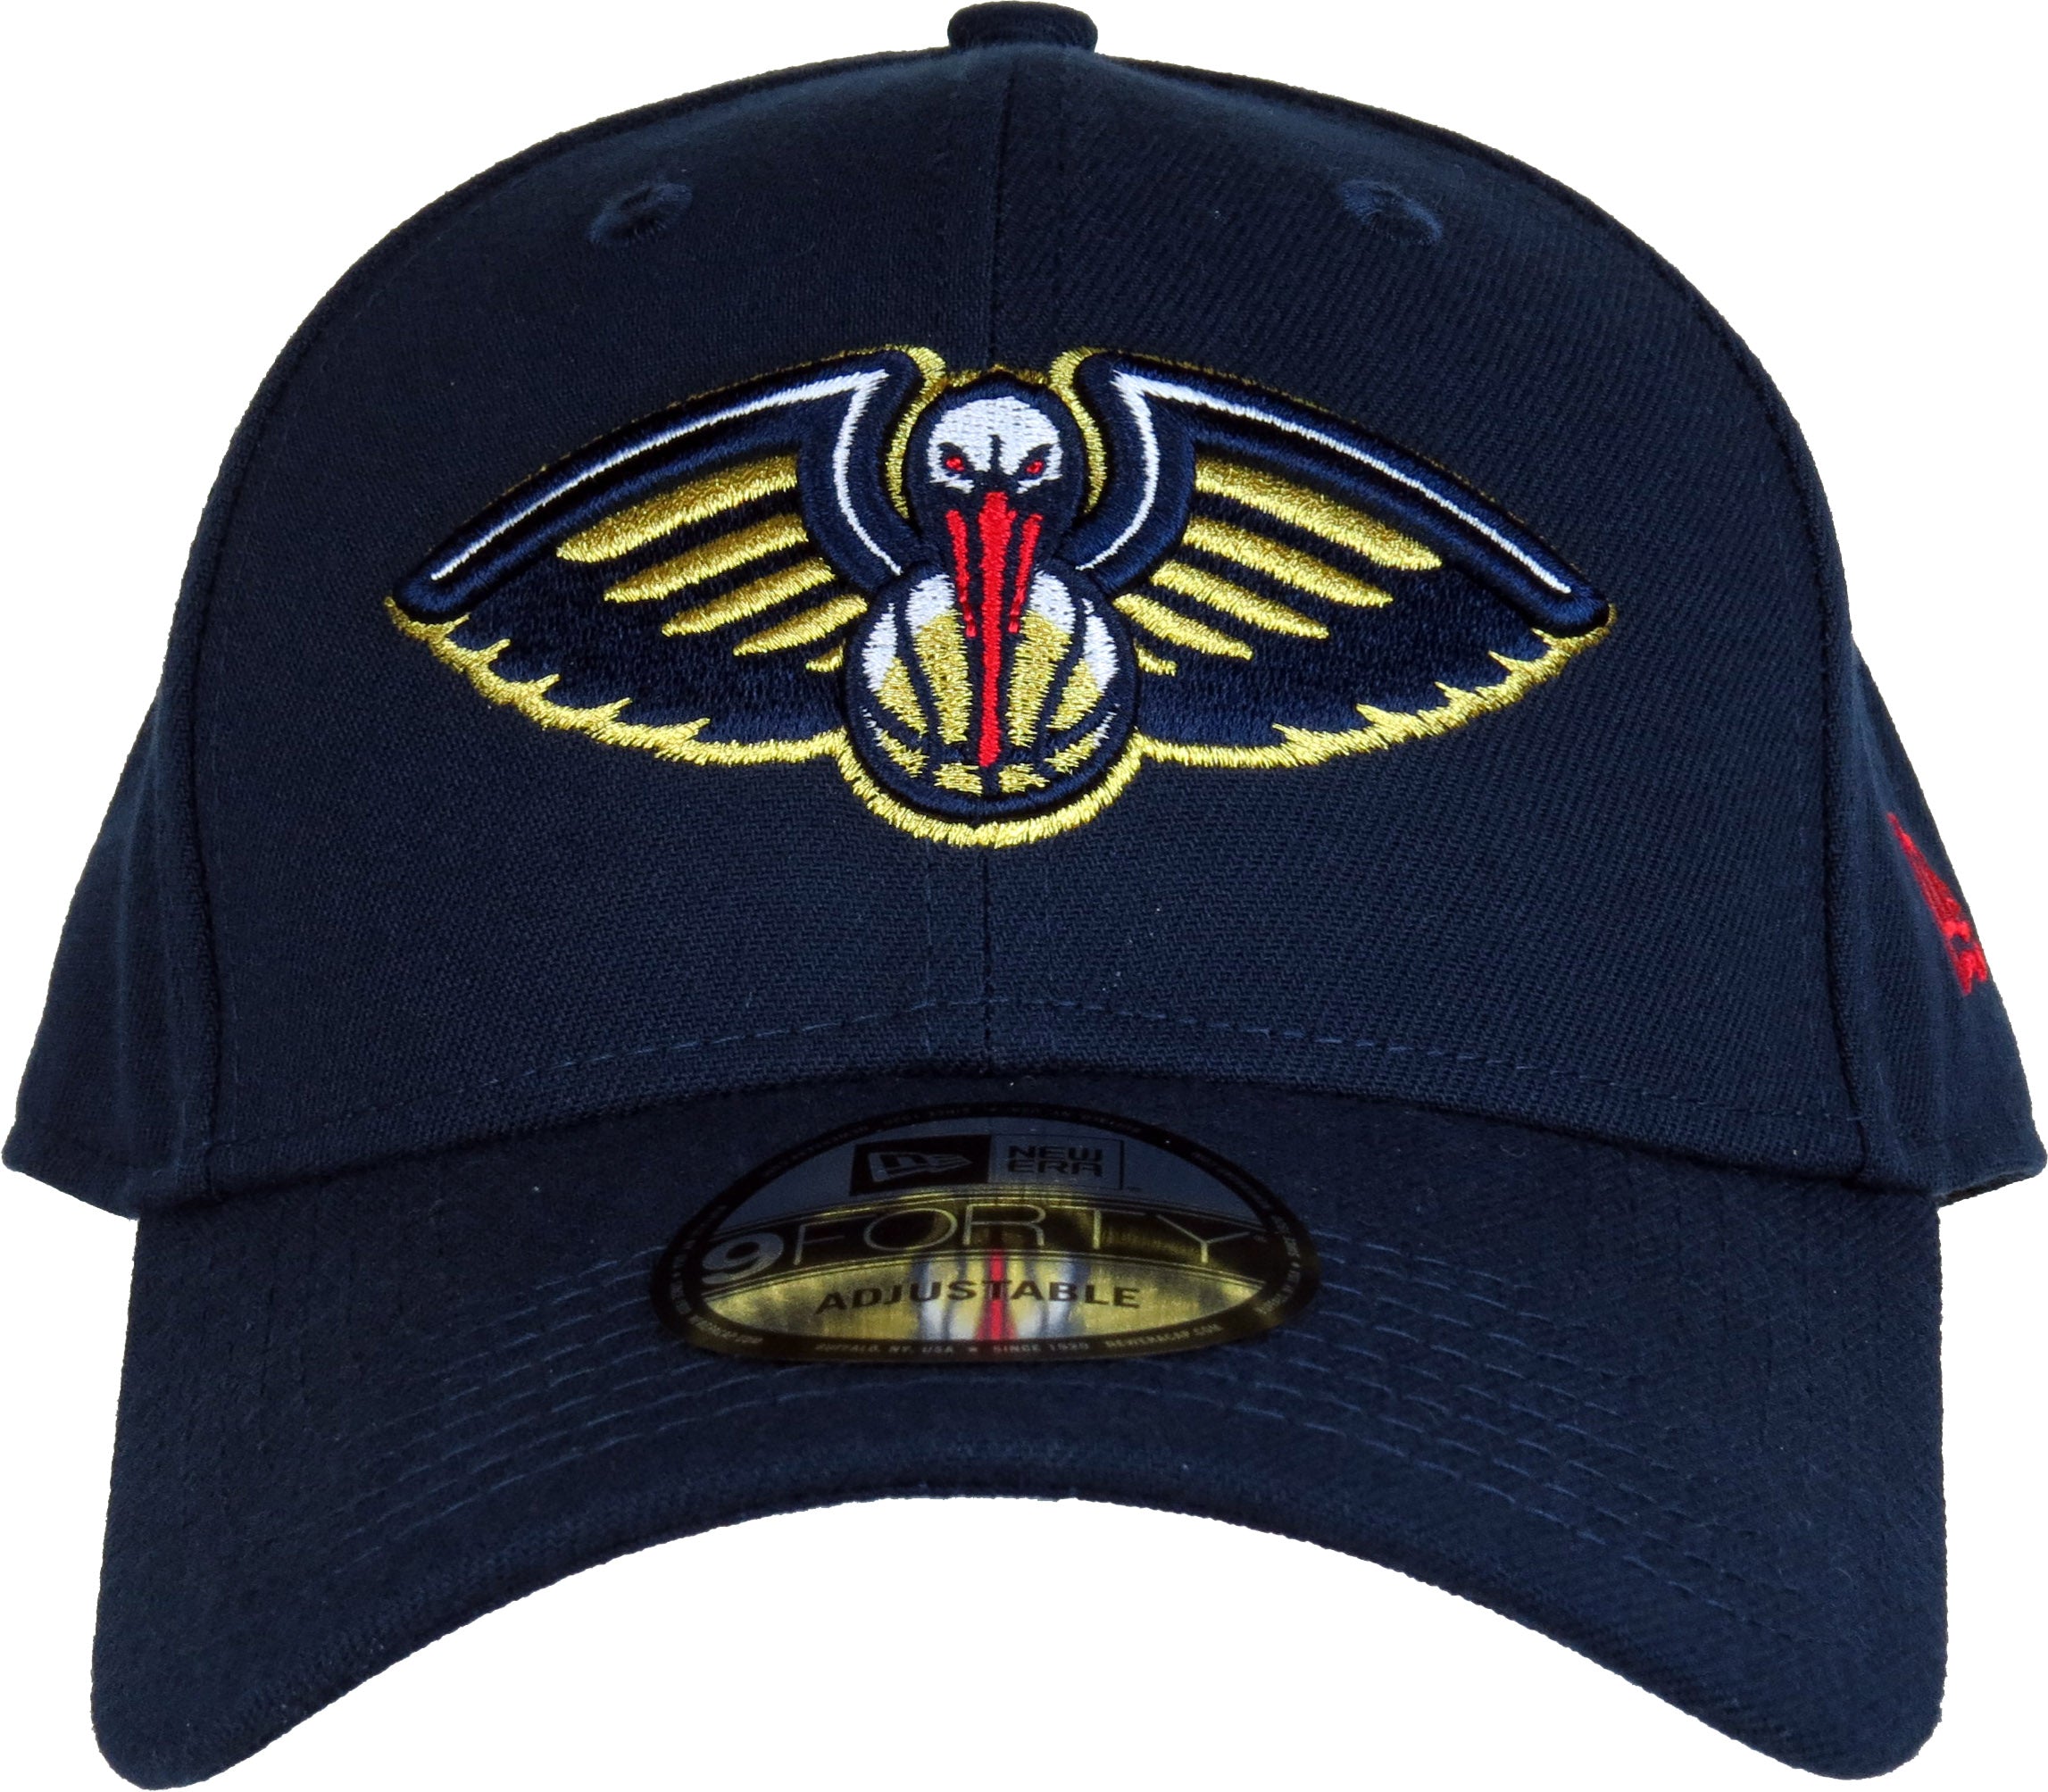 new orleans pelicans clothing